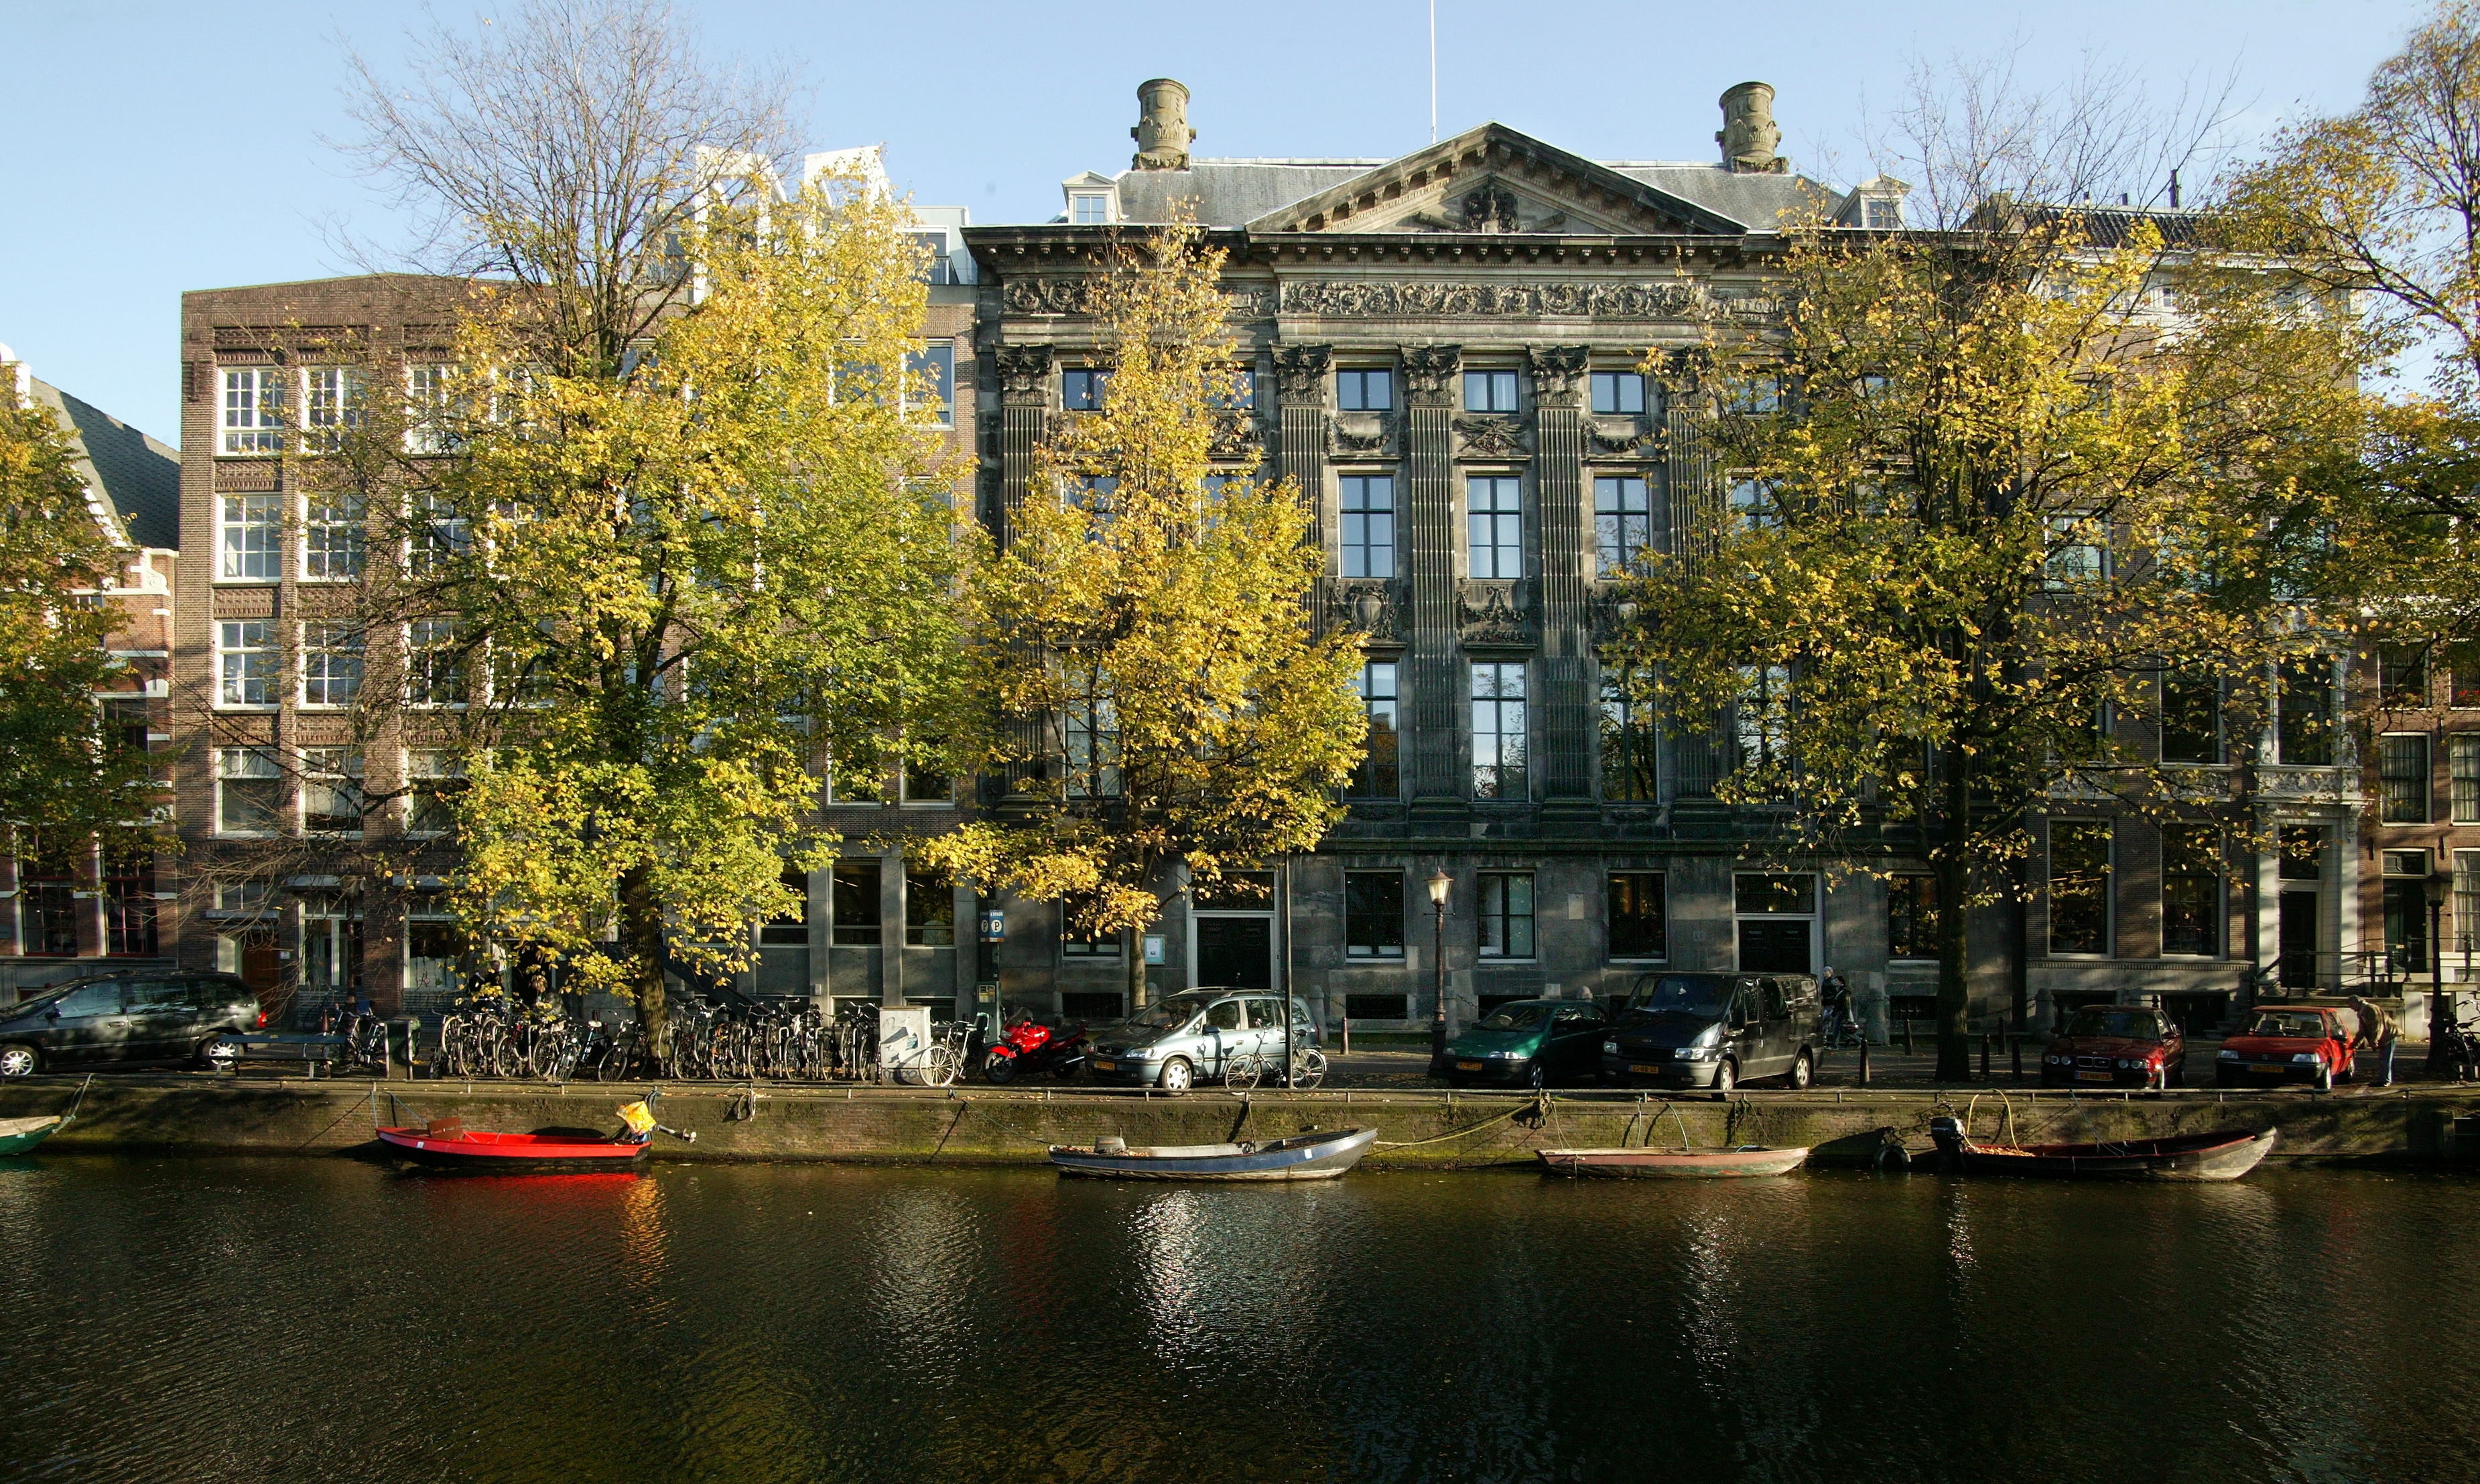 A historic building surrounded by trees next to a river